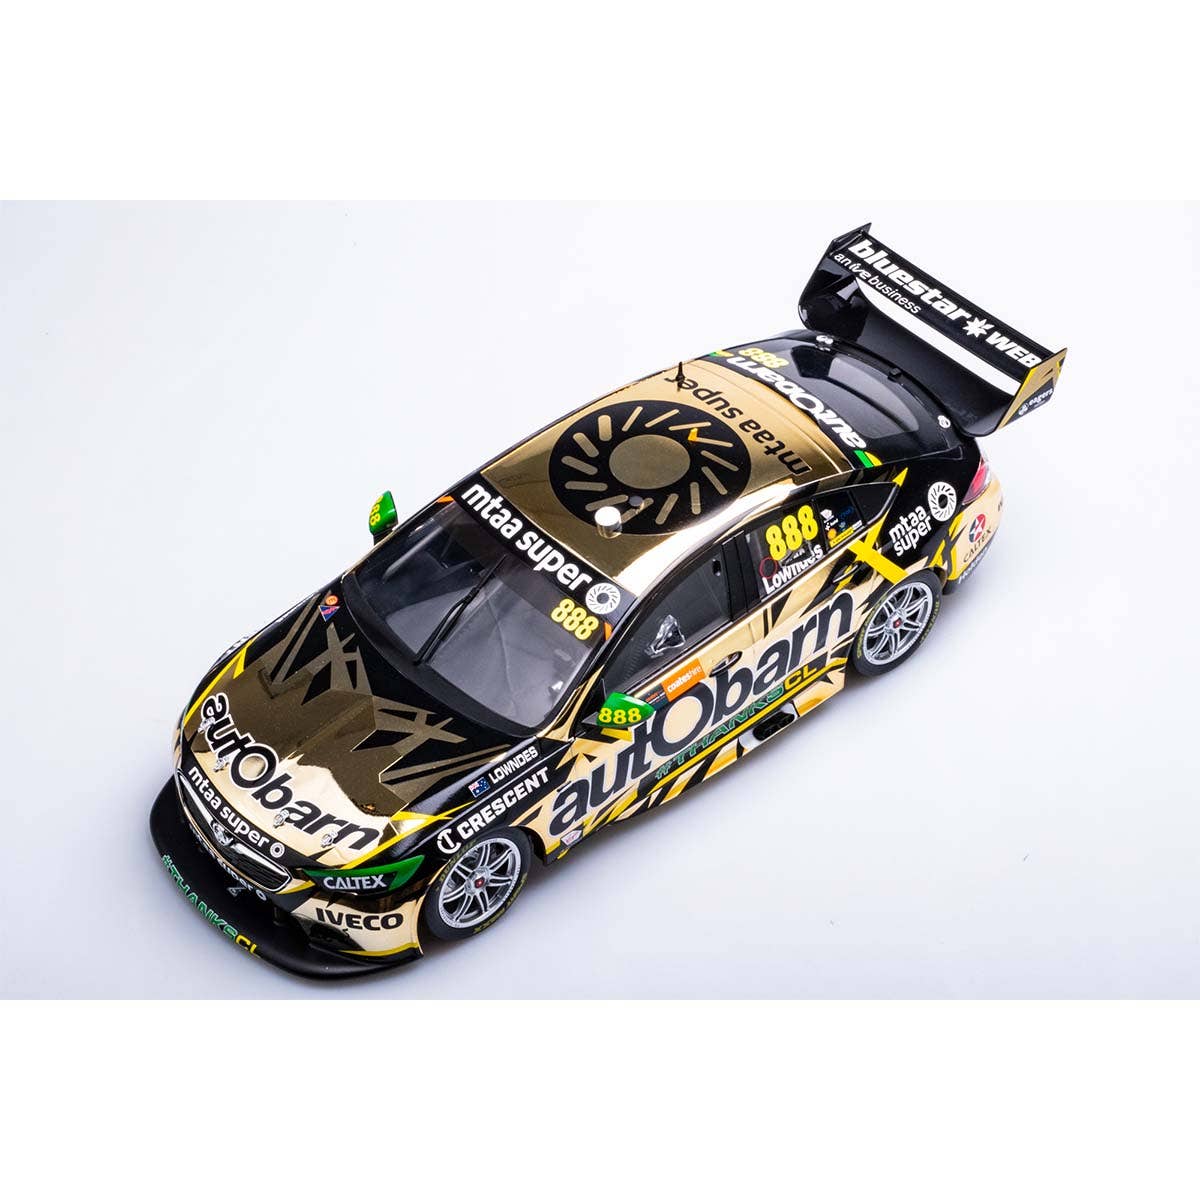 HOLDEN ZB COMMODORE AUTOBARN LOWNDES RACING #888 - LOWNDES - 2018 NEWCASTLE 500 "LOWNDES FINAL RACE" - 1:18 Scale Diecast Model Car